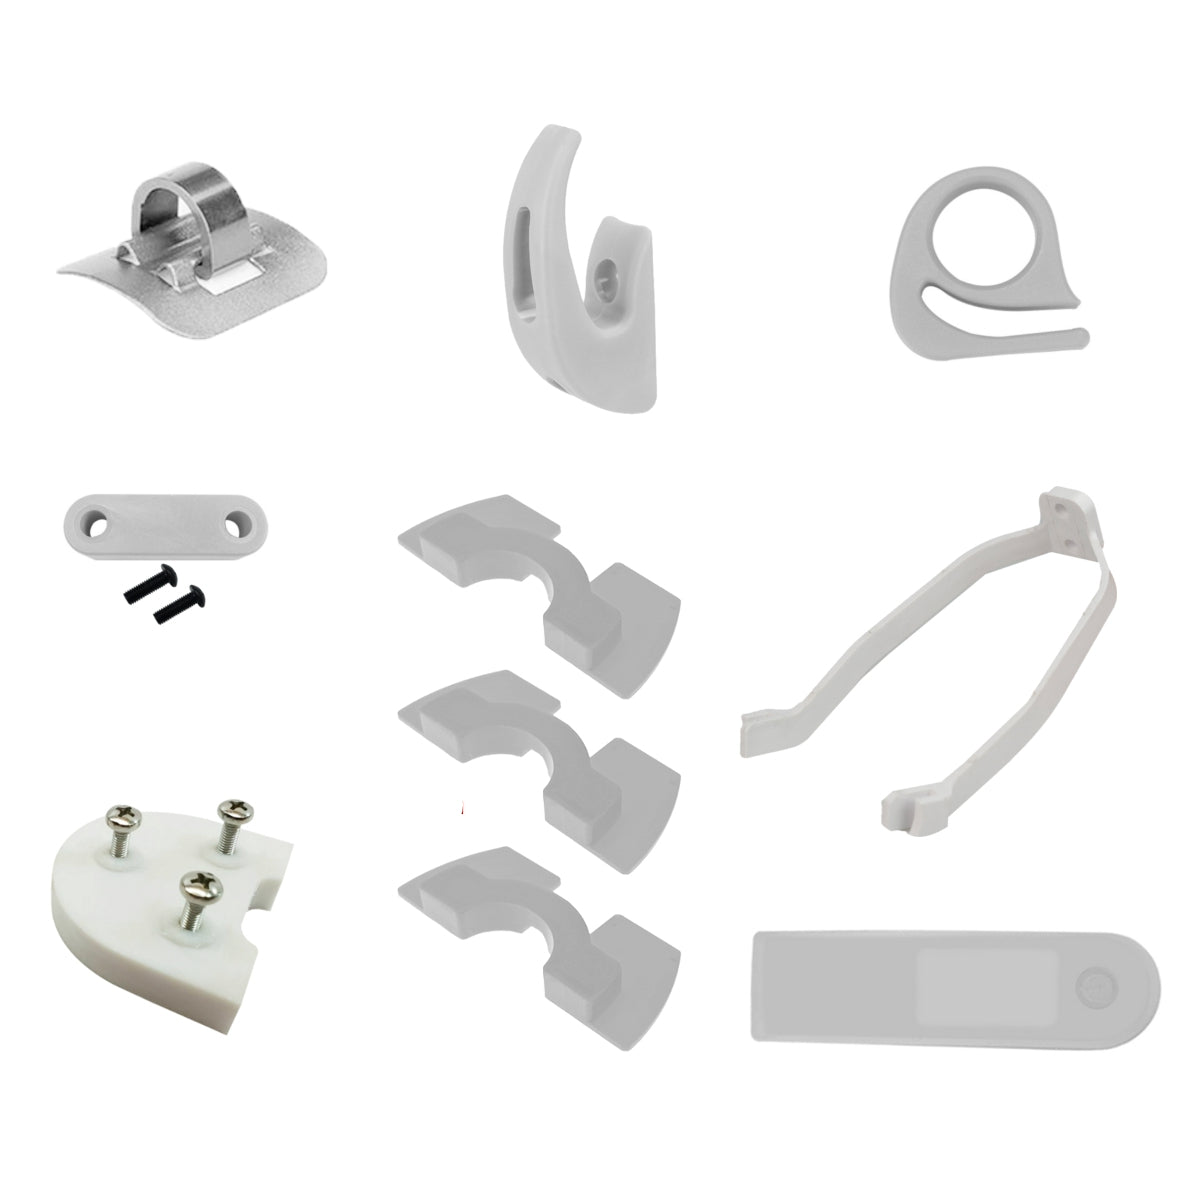 10PSC Red/Black/White Starter Kit Scooter Accessories For Scooter M365/M187/PRO - Auto GoShop